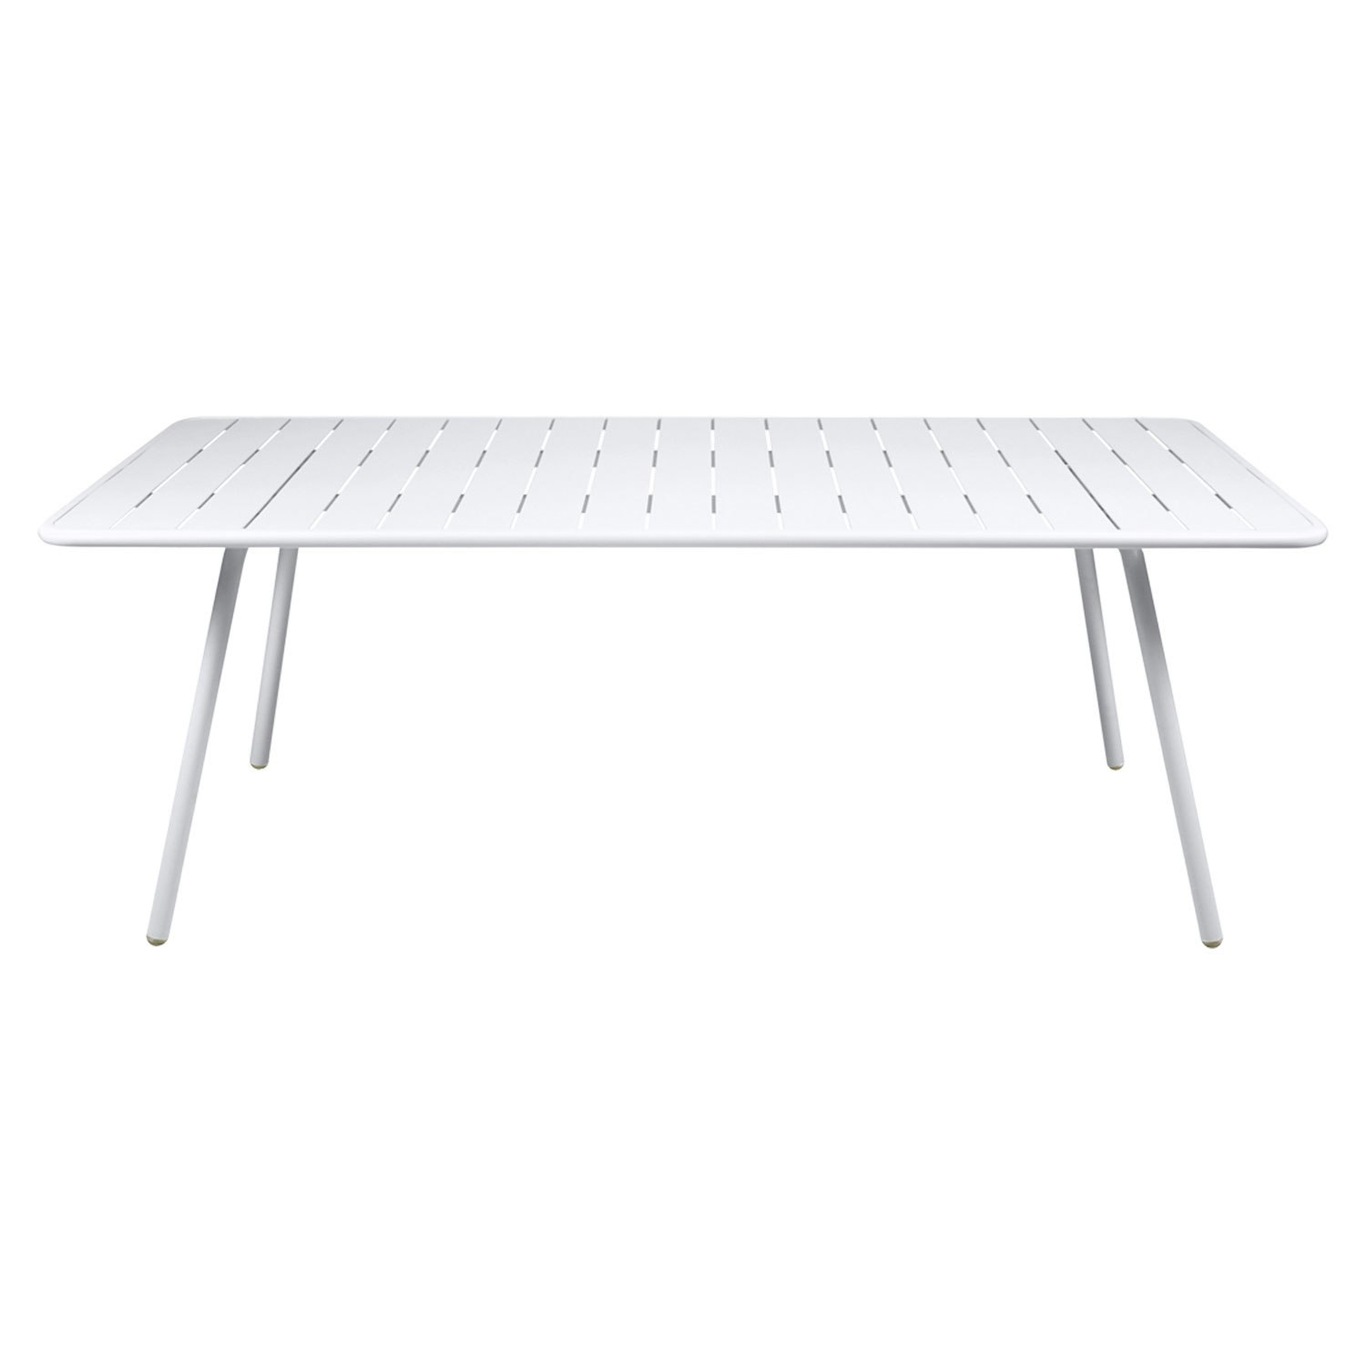 Luxembourg Table 207x100, Cotton White